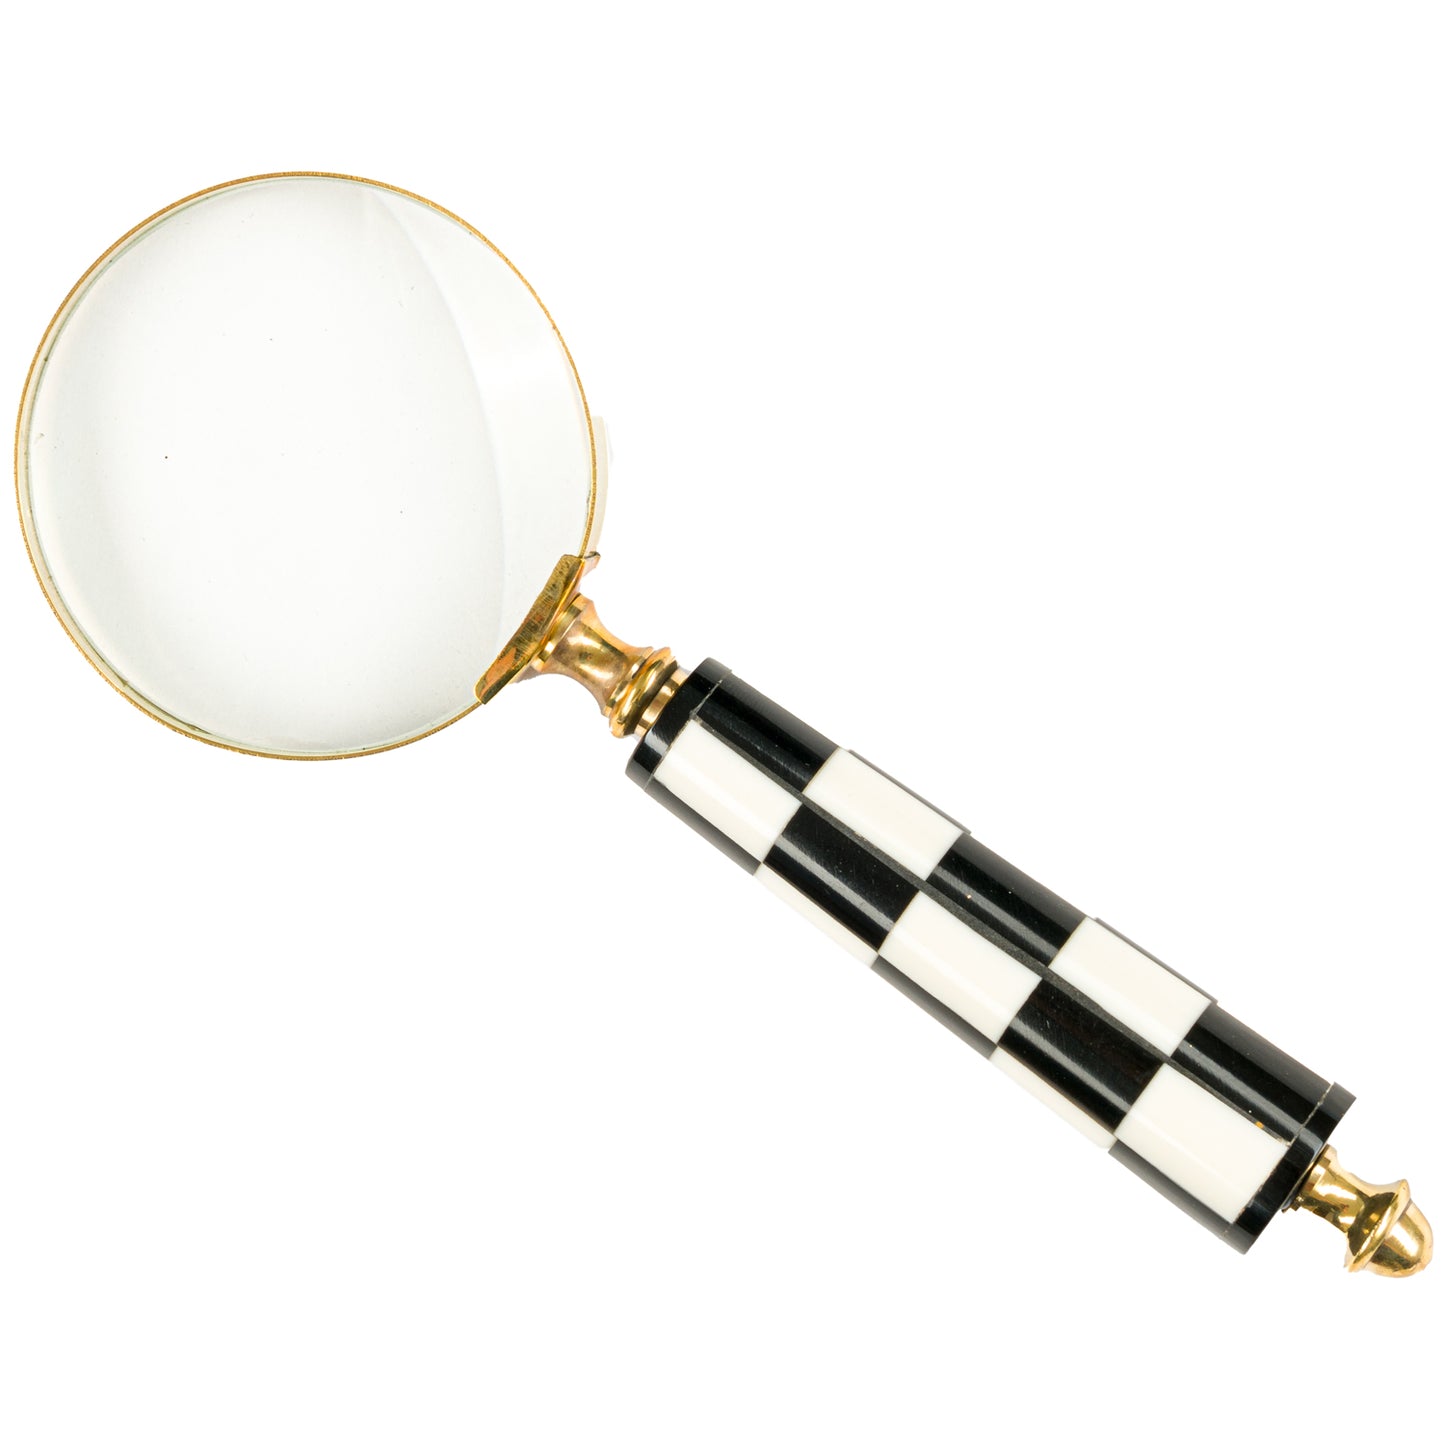 Checkered Magnifying Glass